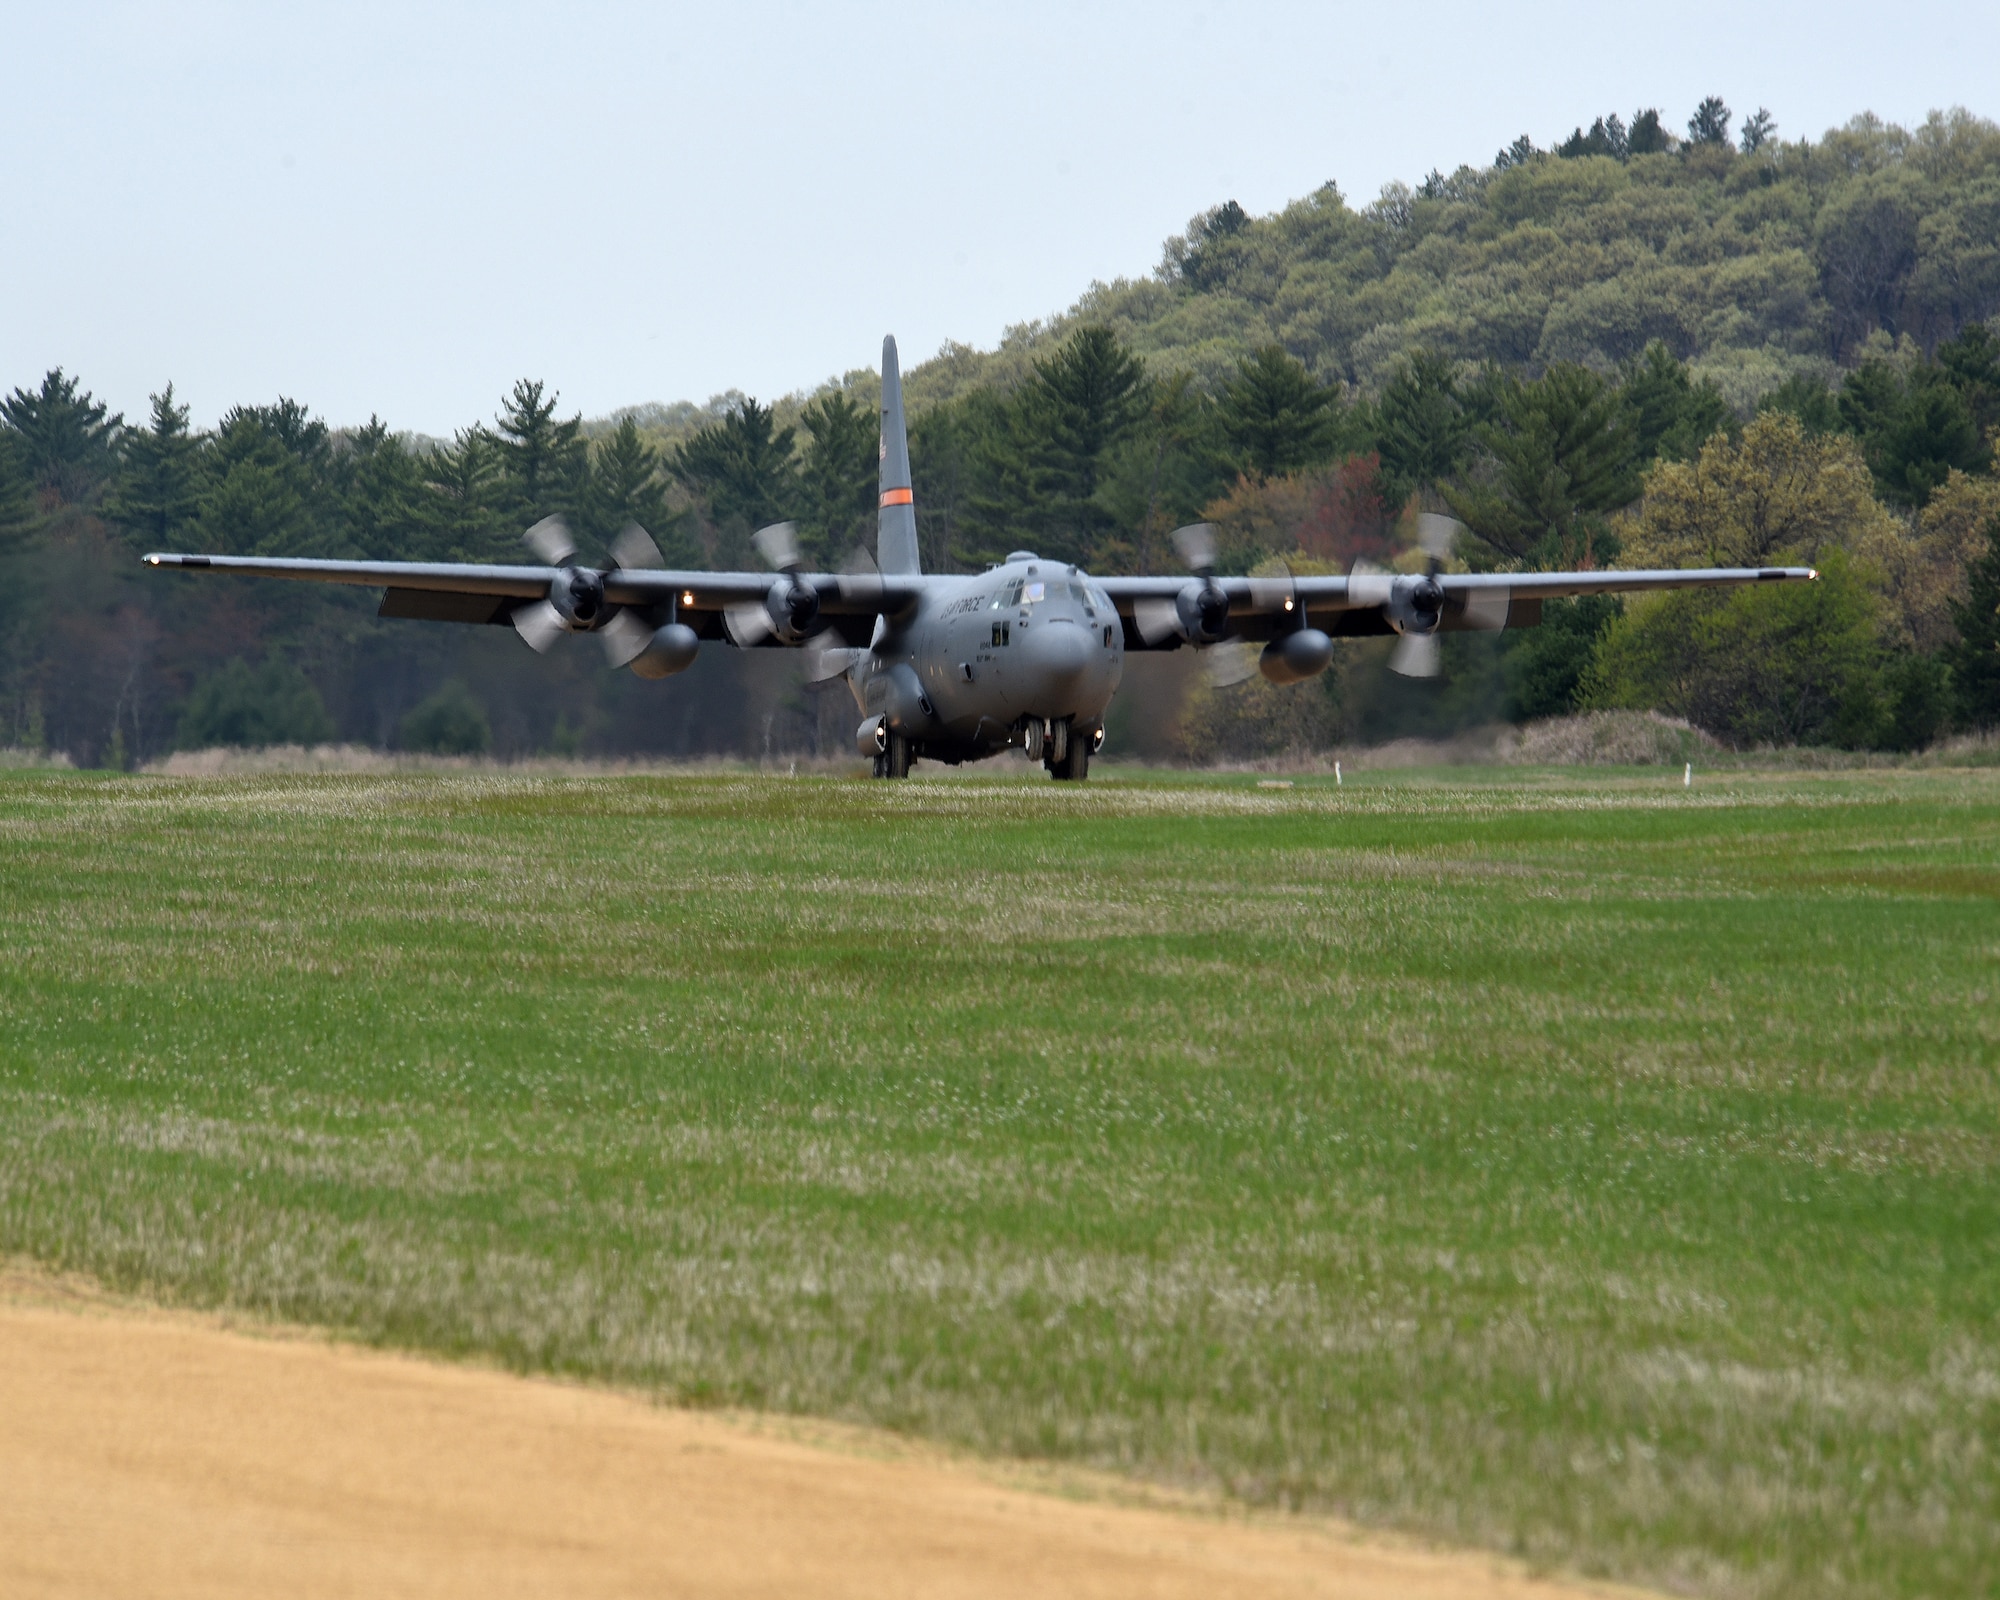 A C-130 Hercules from the 182nd Airlift Wing, Illinois Air National Guard, lands at Young Landing Zone at Fort McCoy, Wis. May 14, 2018. A number of pilots were qualifying to complete their unimproved landing certification. (U.S. Air National Guard photo by Master Sgt. Todd A. Pendleton)